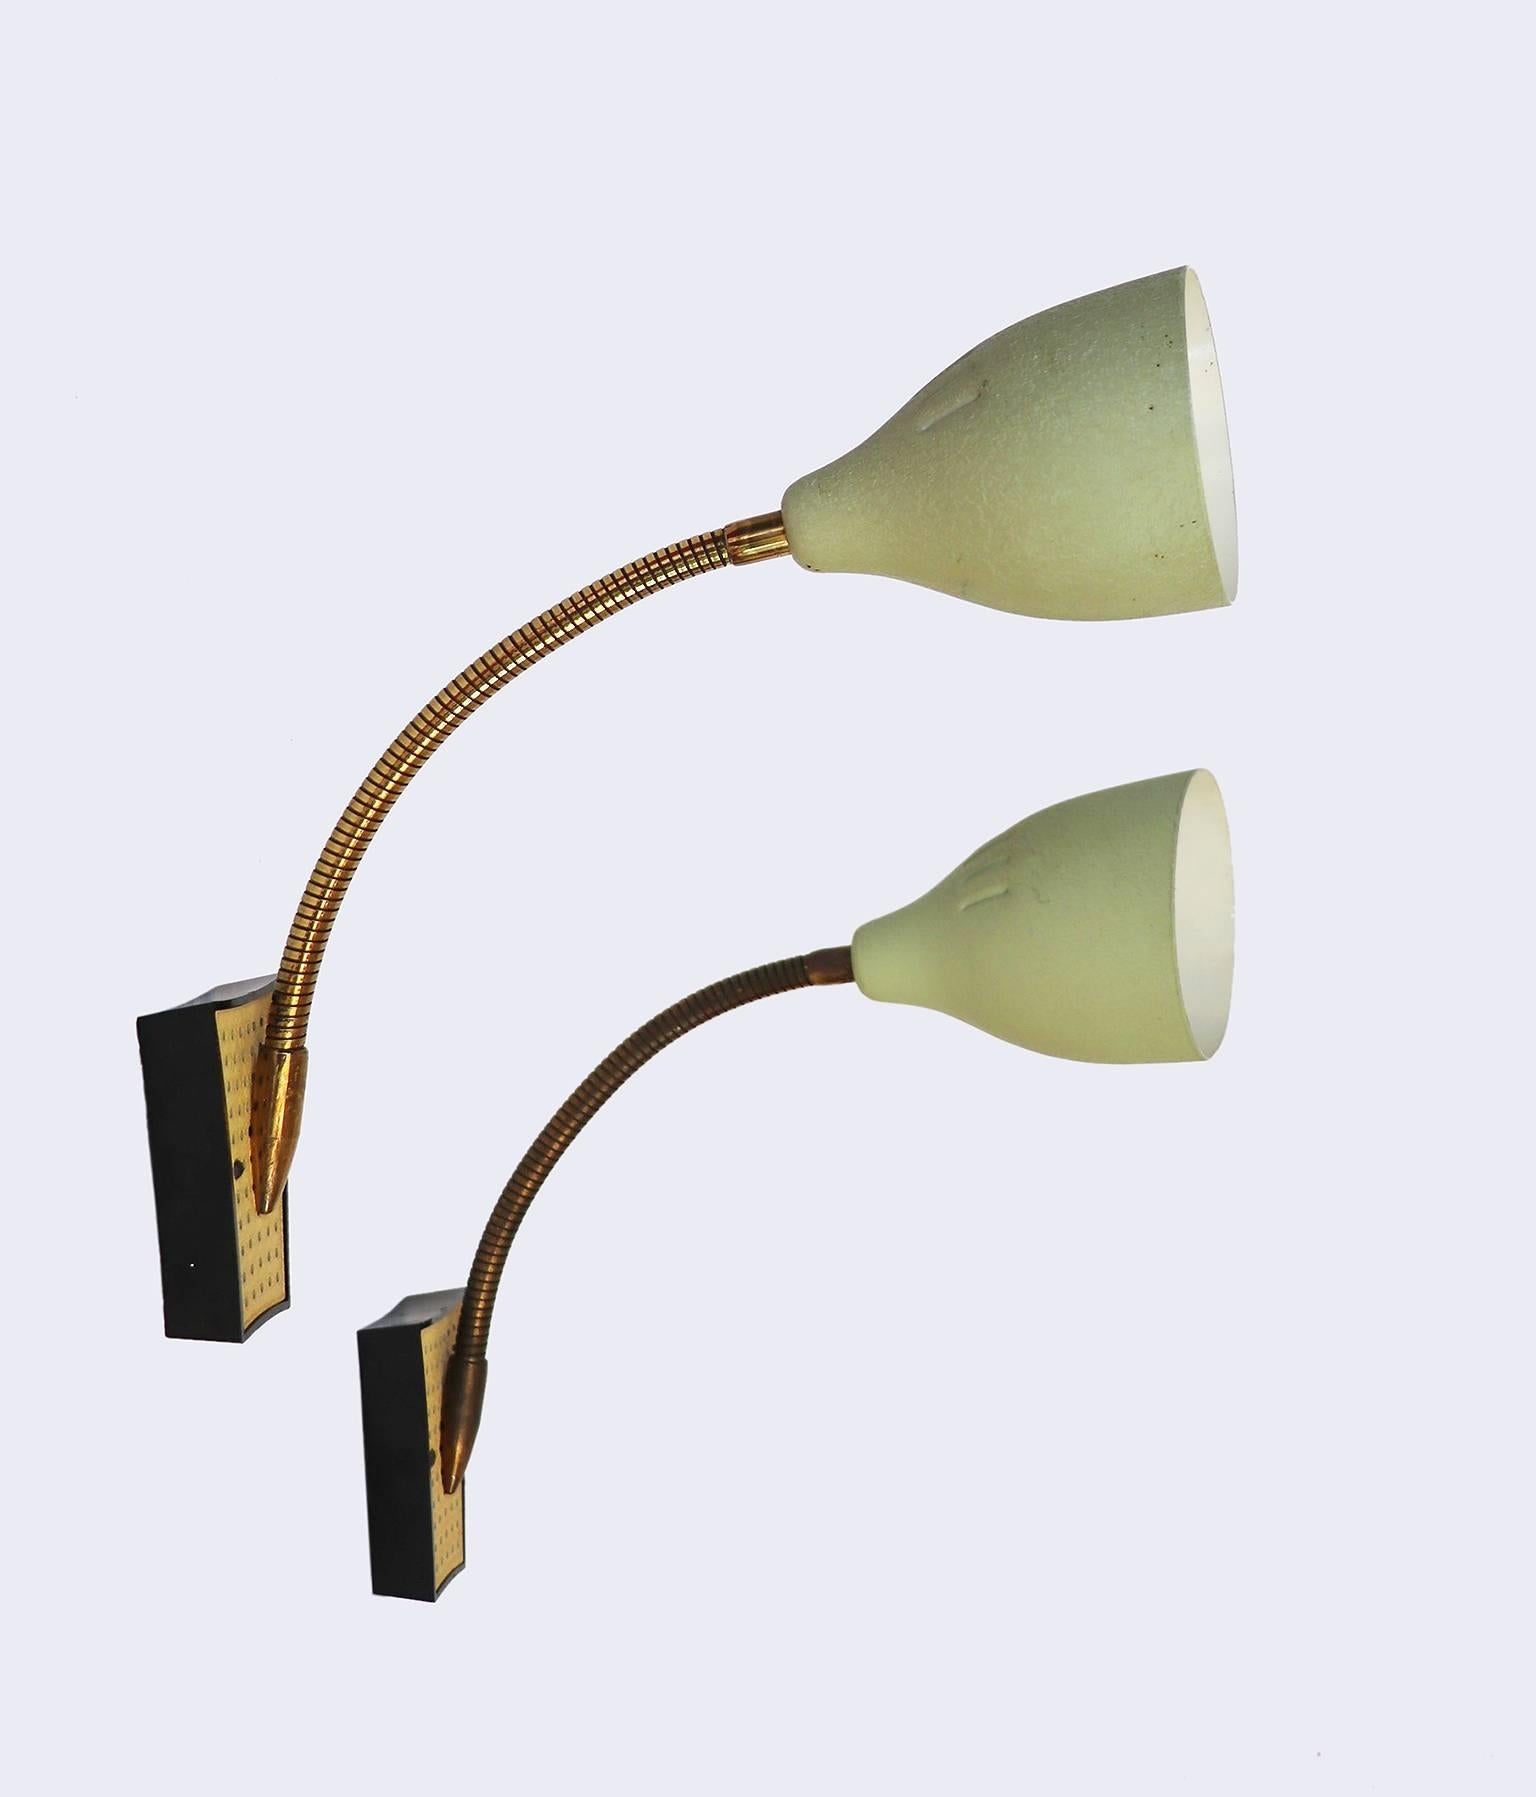 Elegant pair of adjustable Italian mid century gooseneck wall sconces made of perforated brass, enameled. 

Lighting: takes one Edison base screw bulb per lamp. 
Wattage: we recommend up to 60w per bulb. Works on 220v as well as 110v. 
Condition: